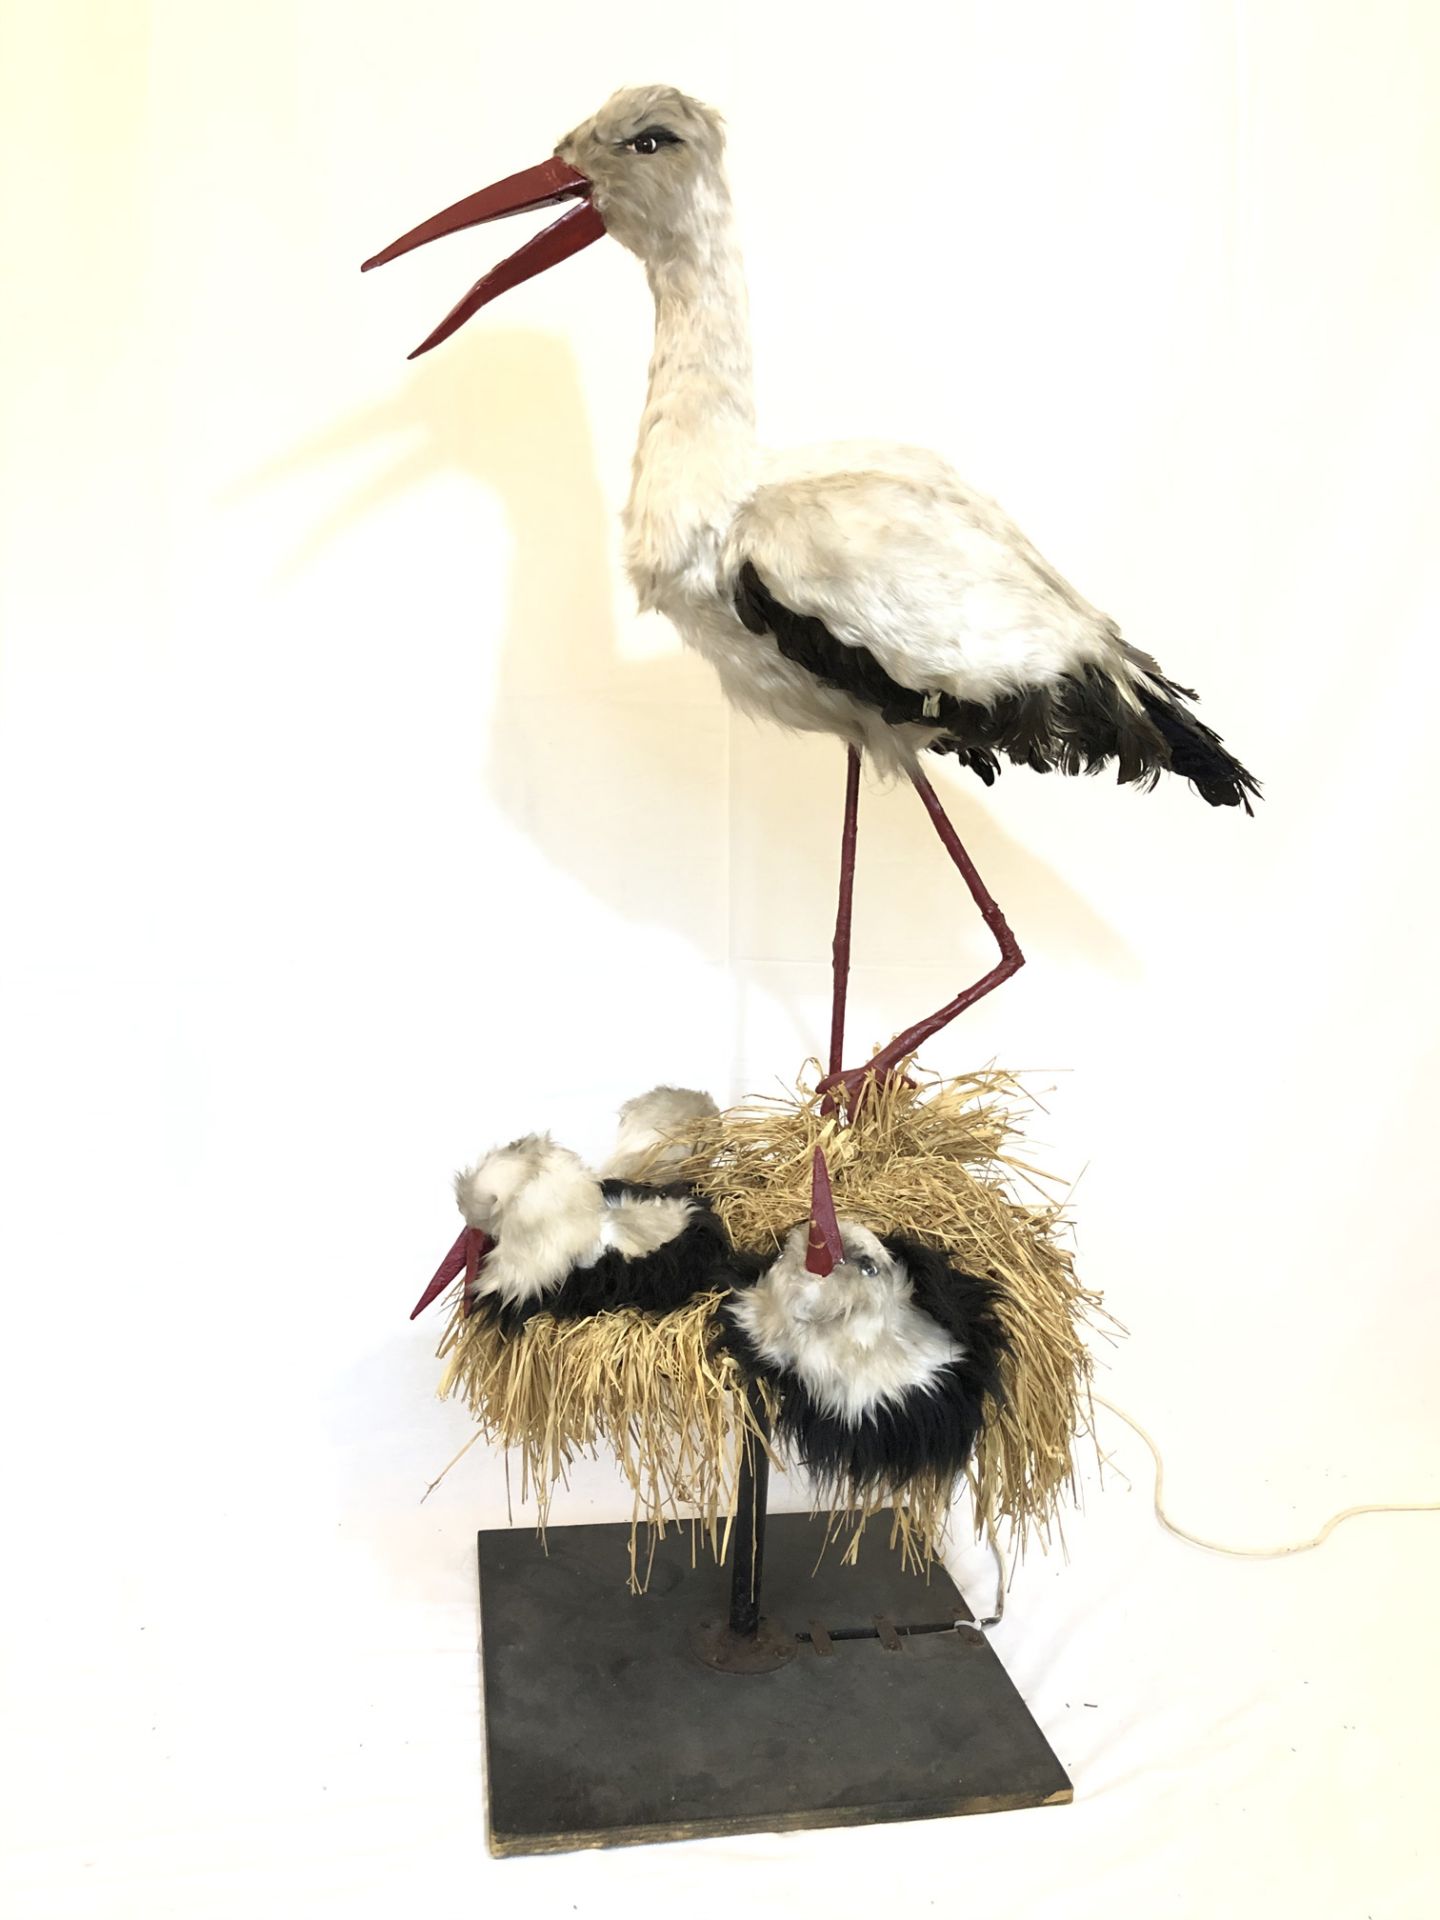 Moving Store Display Doll Stork with 3 Babies - Image 4 of 4